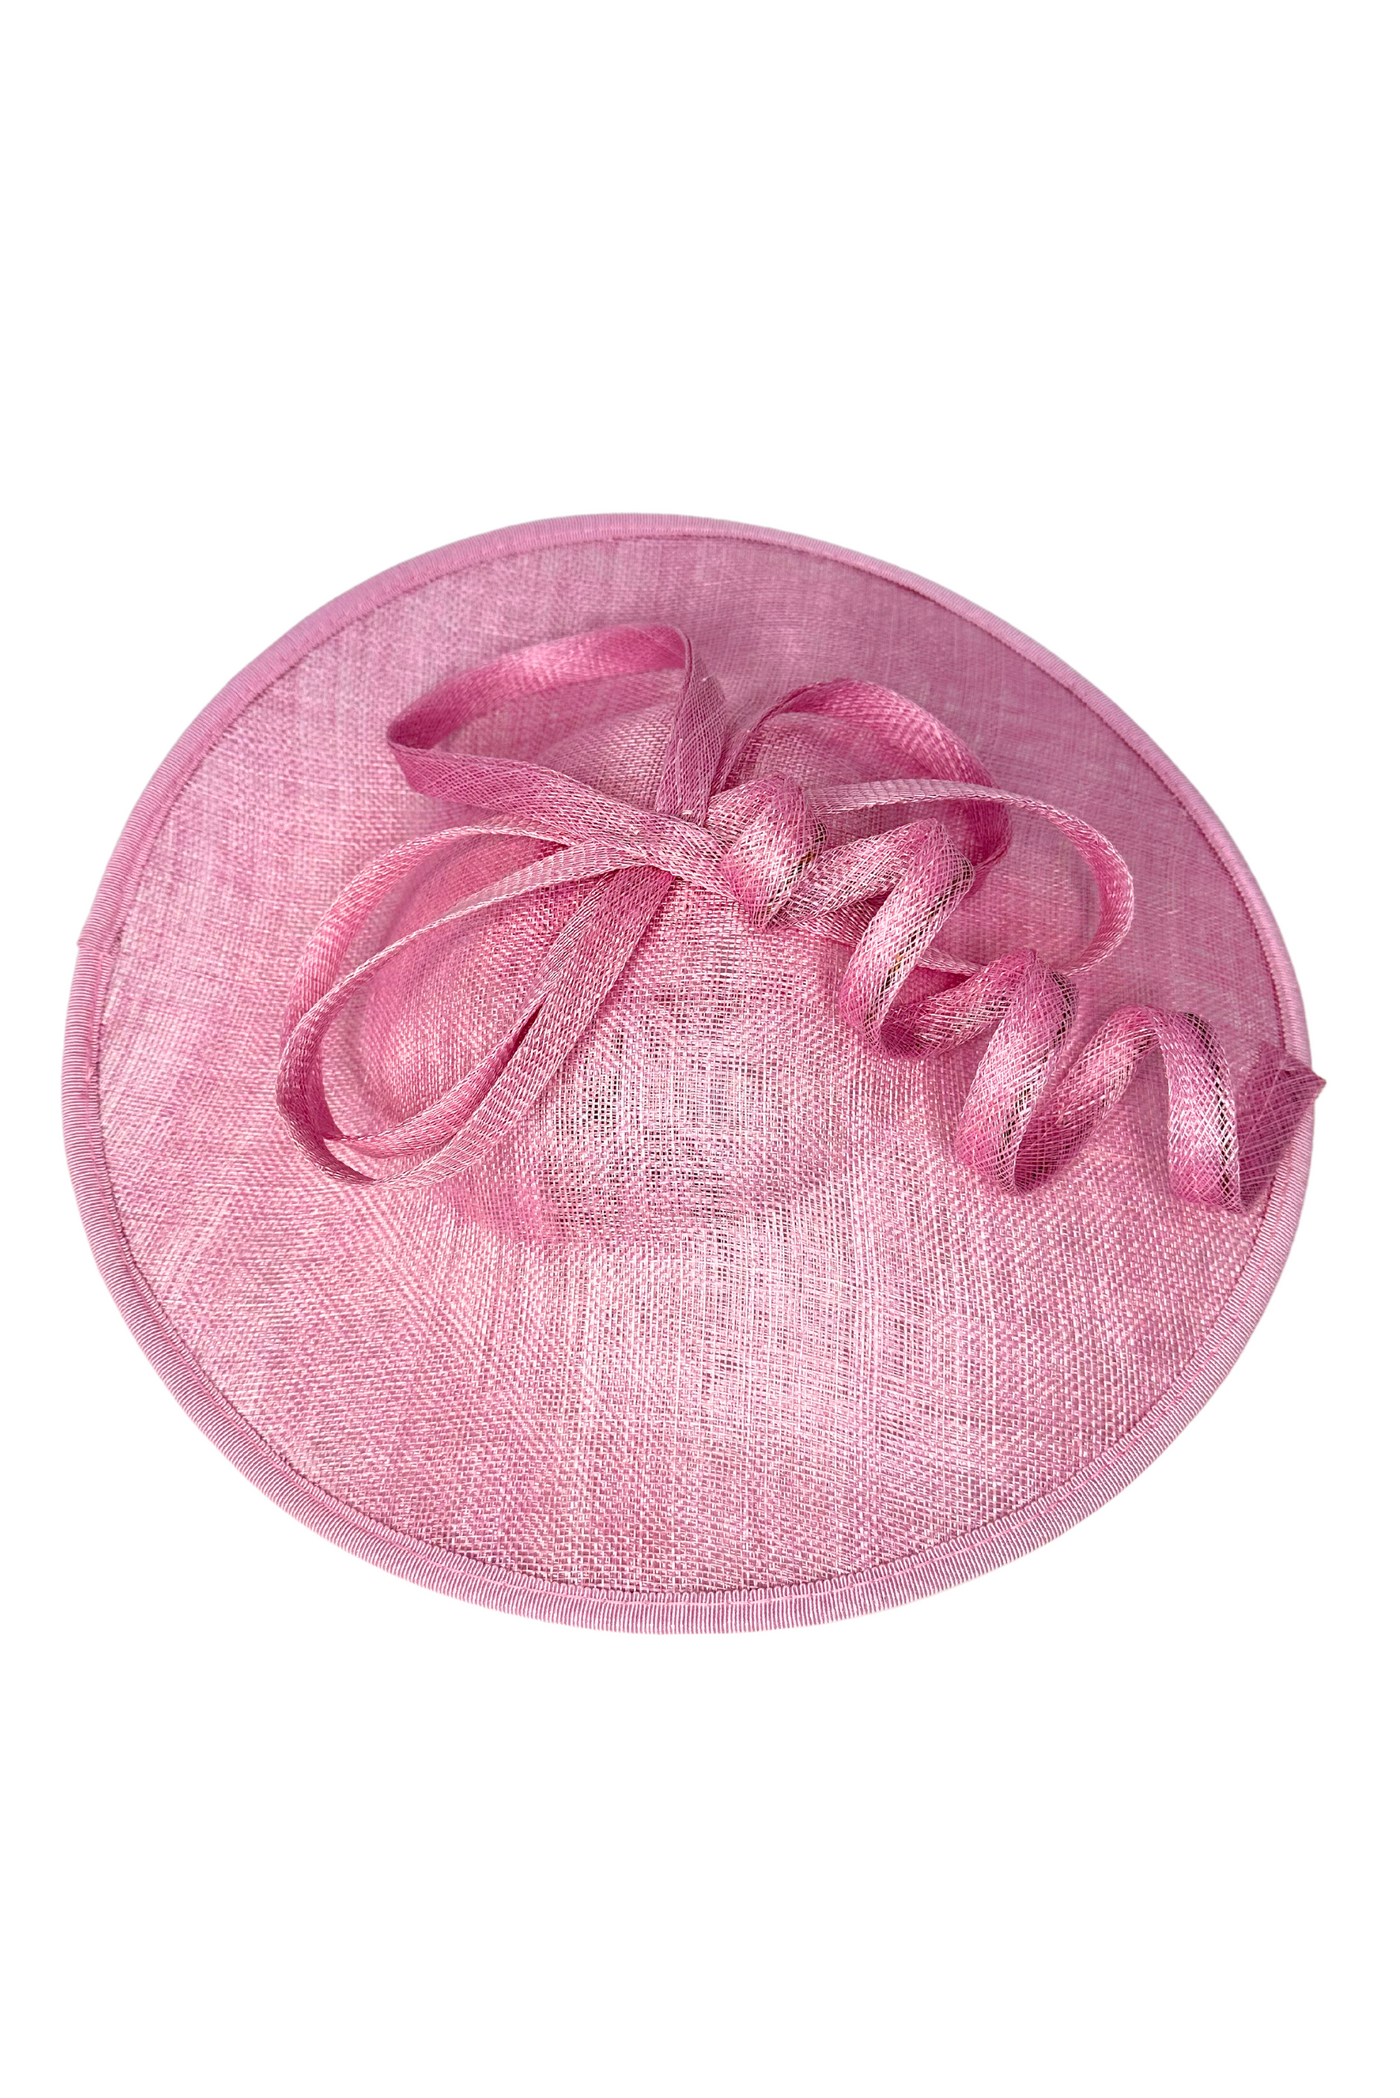 Blossom Pink Fascinator with Twist Detail